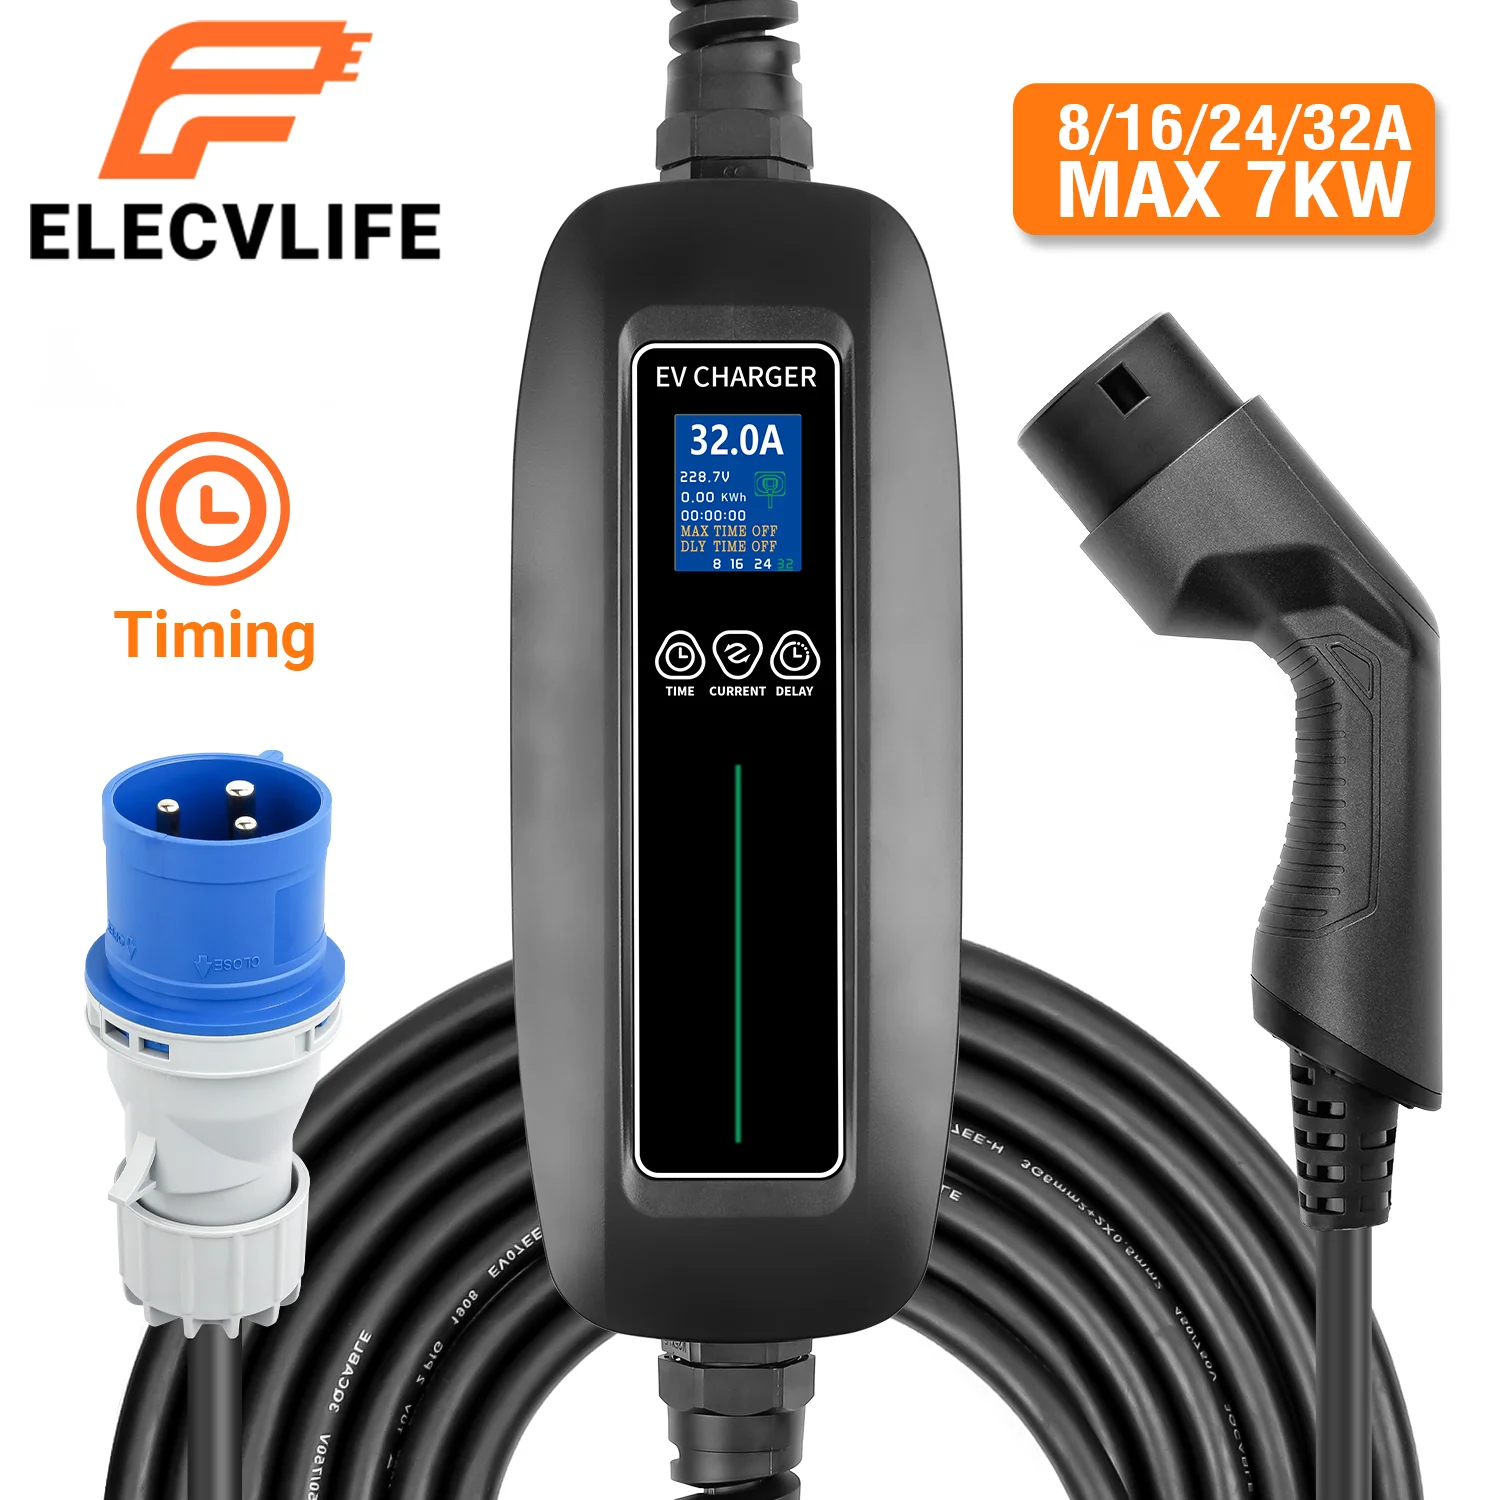 Electric Car Charger Timing Portable EV Charger 7kW, Type 2 Cable 8/16/24/32A Adjustable Charging IEC 62196 EVSE for VW Tesla